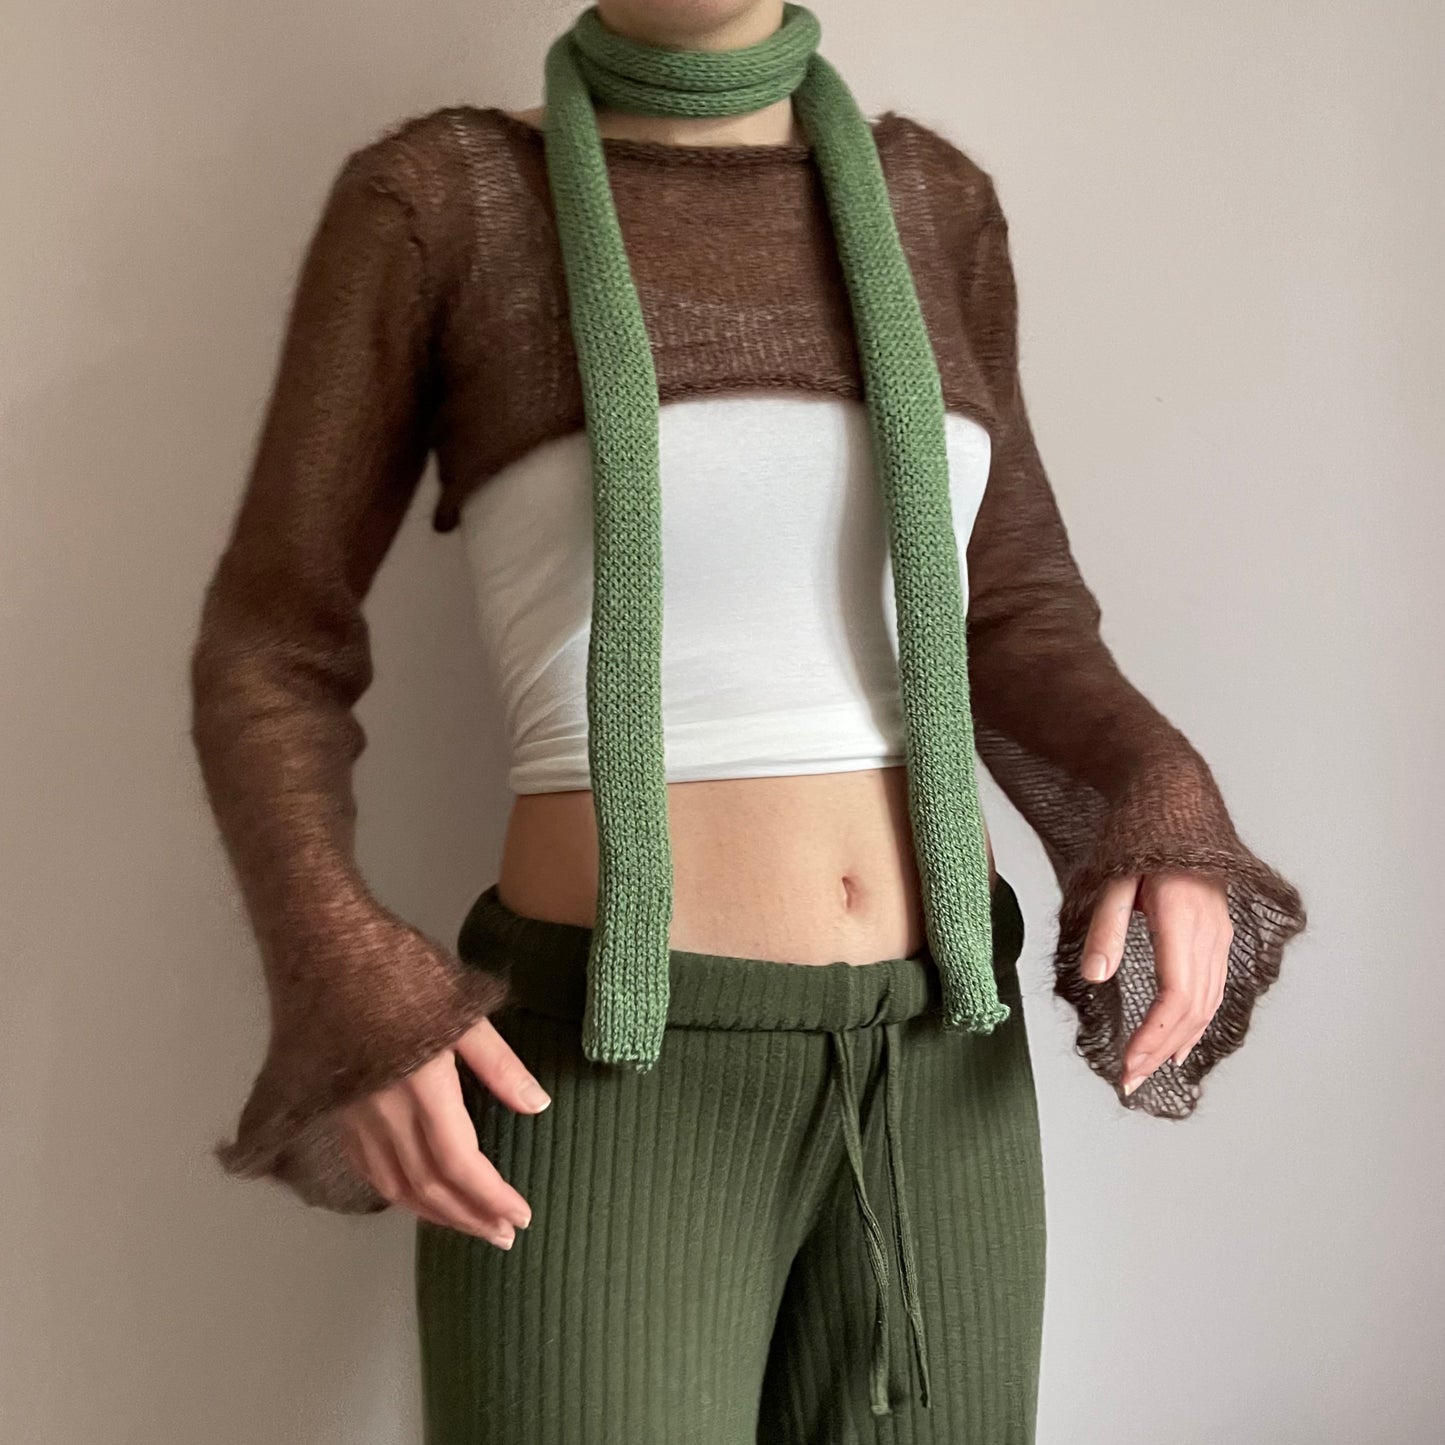 Handmade knitted skinny scarf in sage green